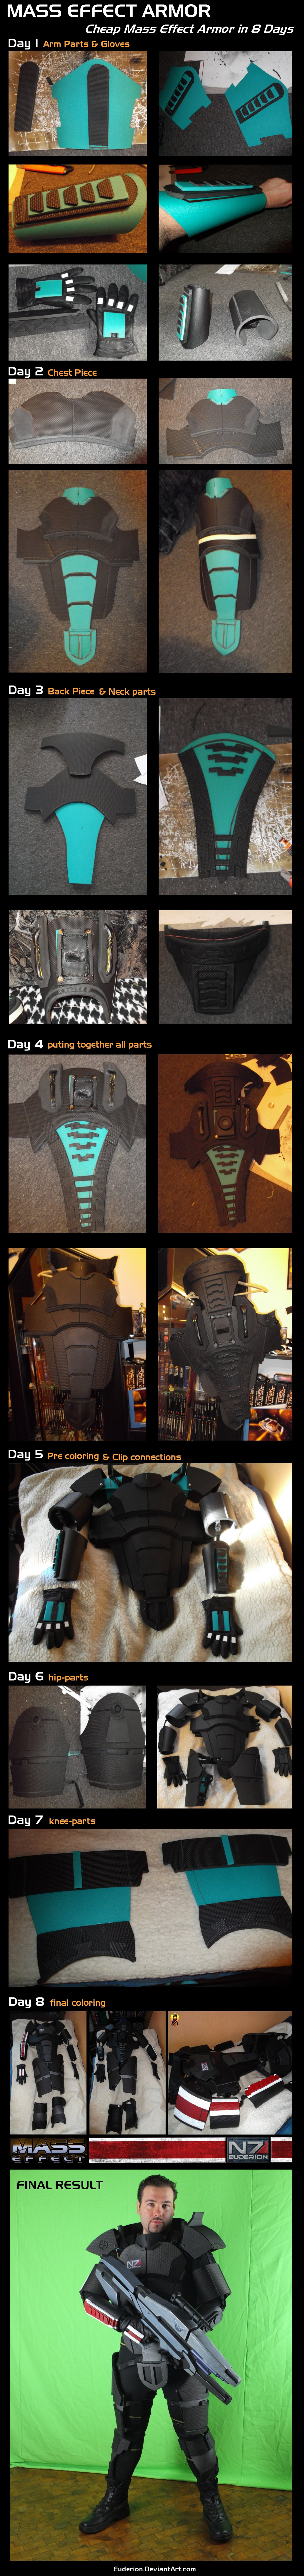 Mass Effect Armor Step by Step Construction